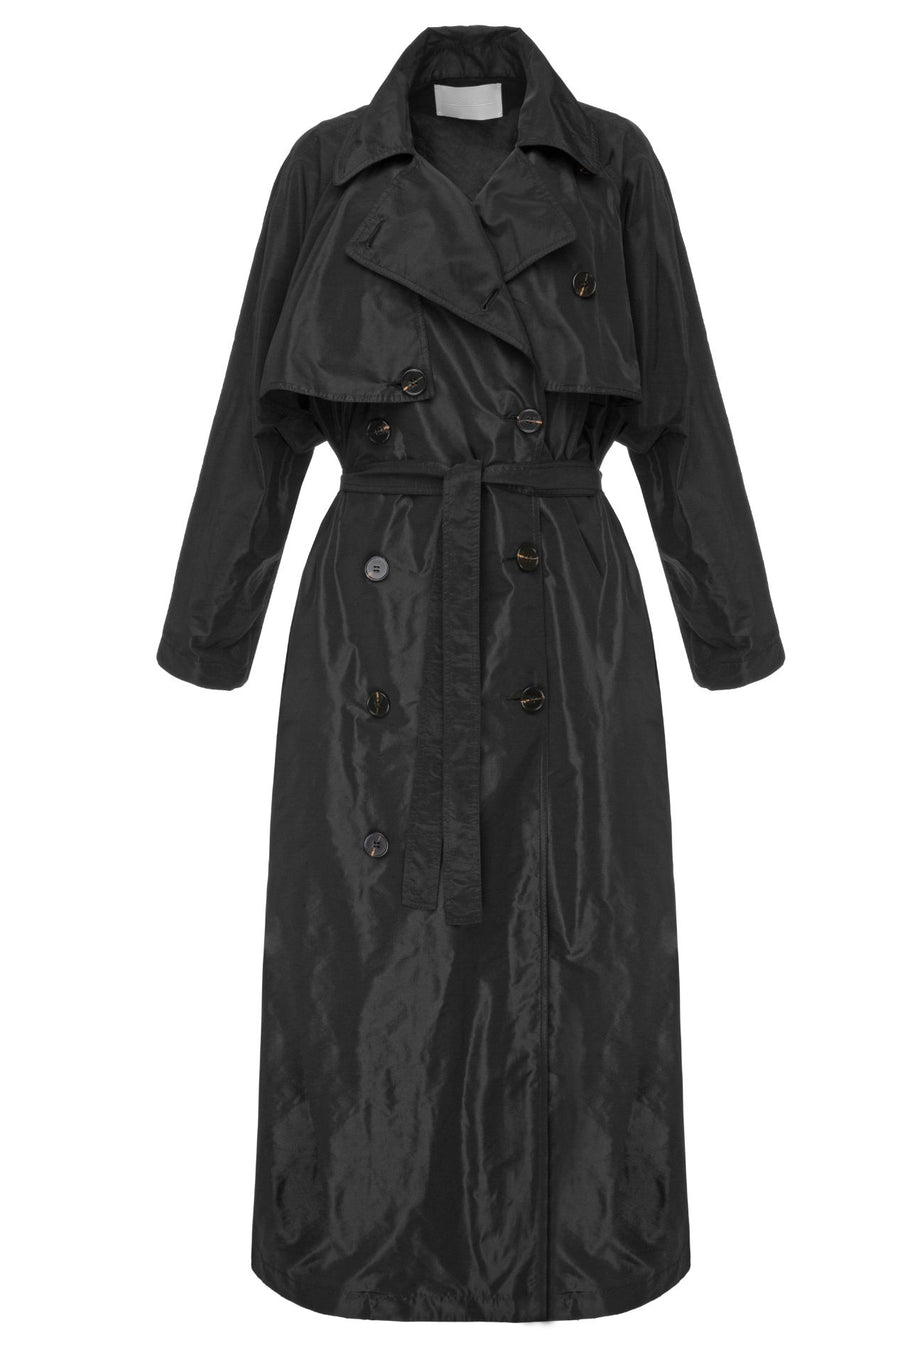 Nasta Black Double-Breasted Trench Coat